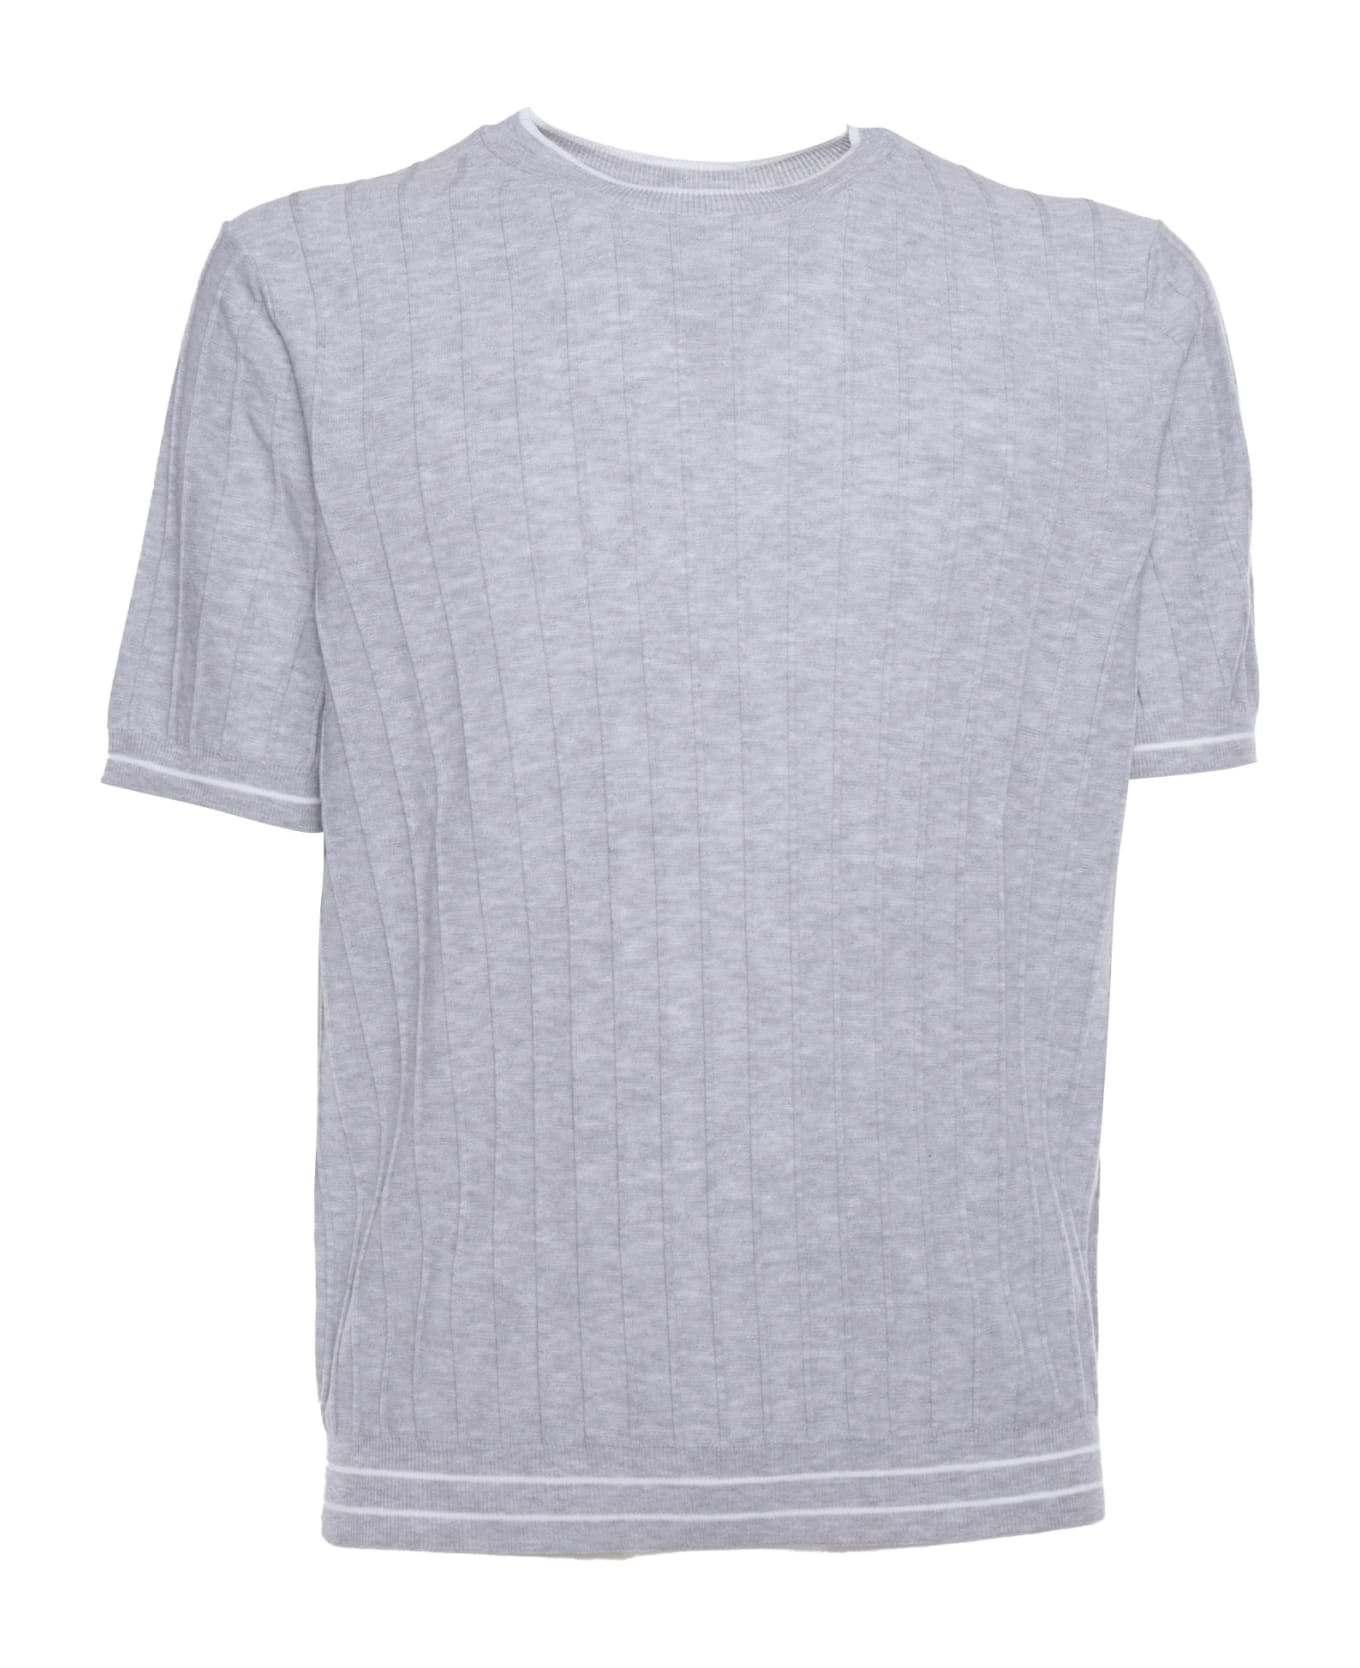 Peserico Knitted T-shirt - GREY